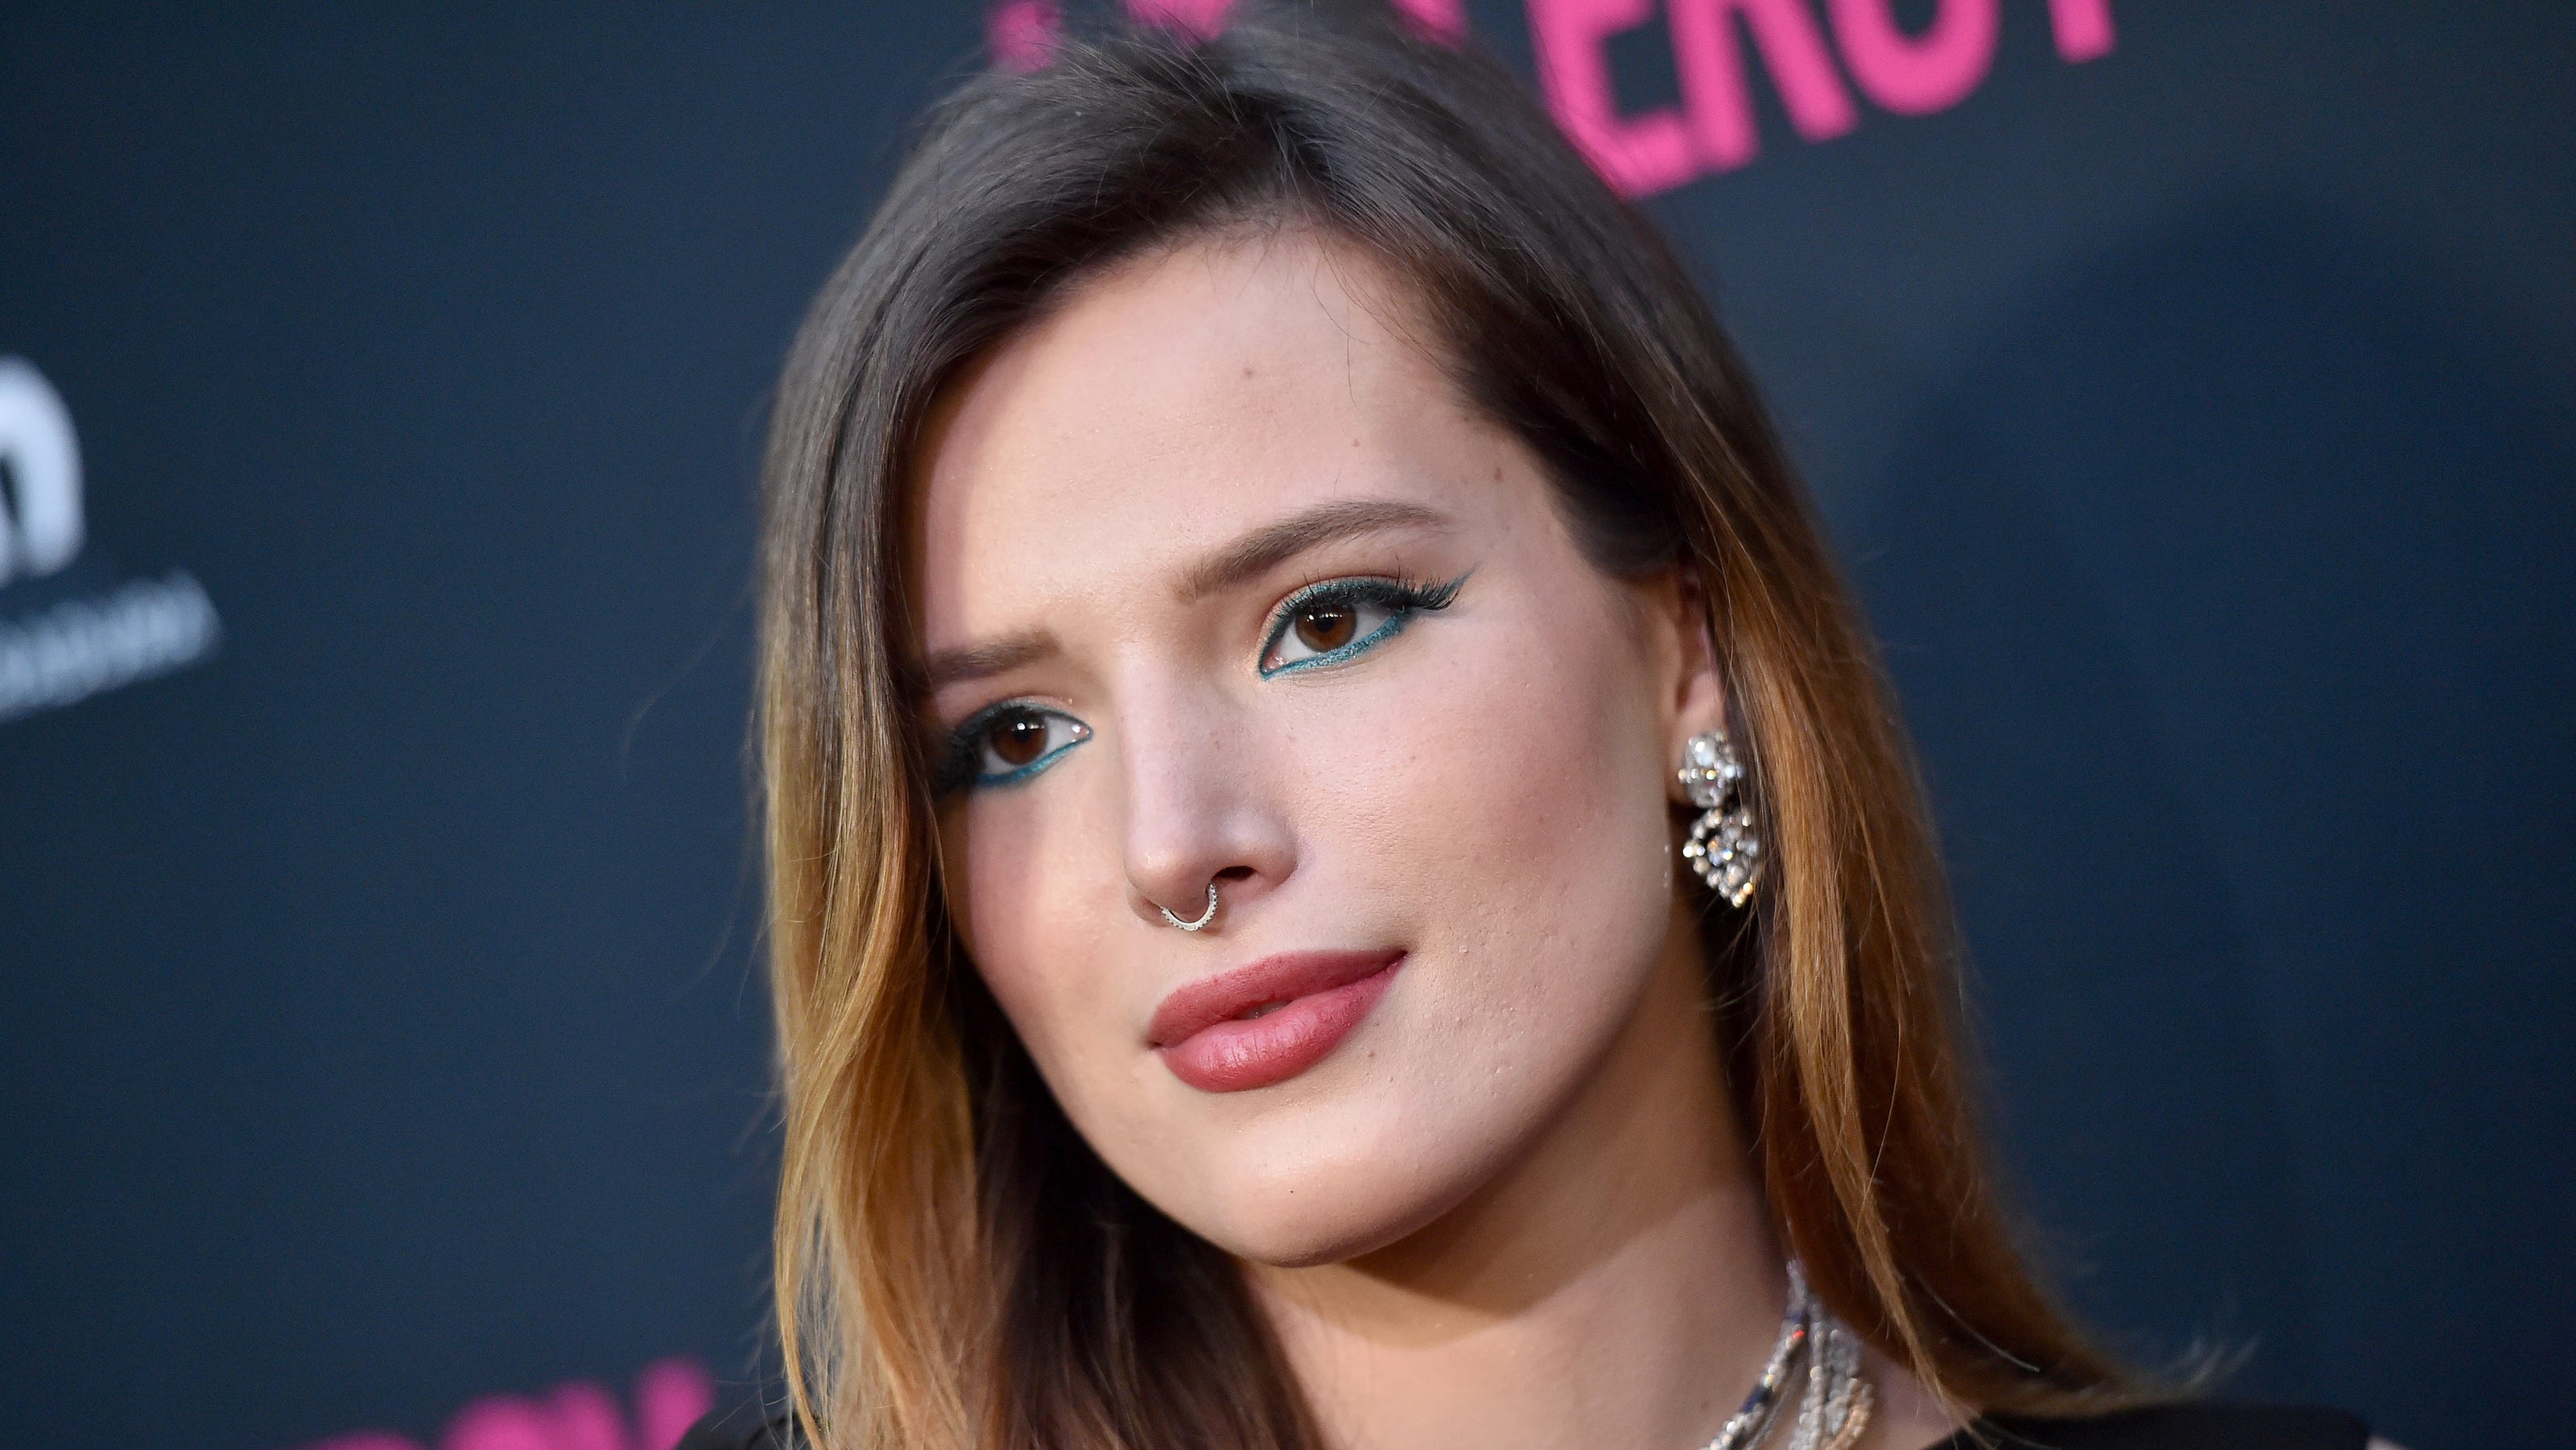 OnlyFans: Bella Thorne says she made $2M in less than a week